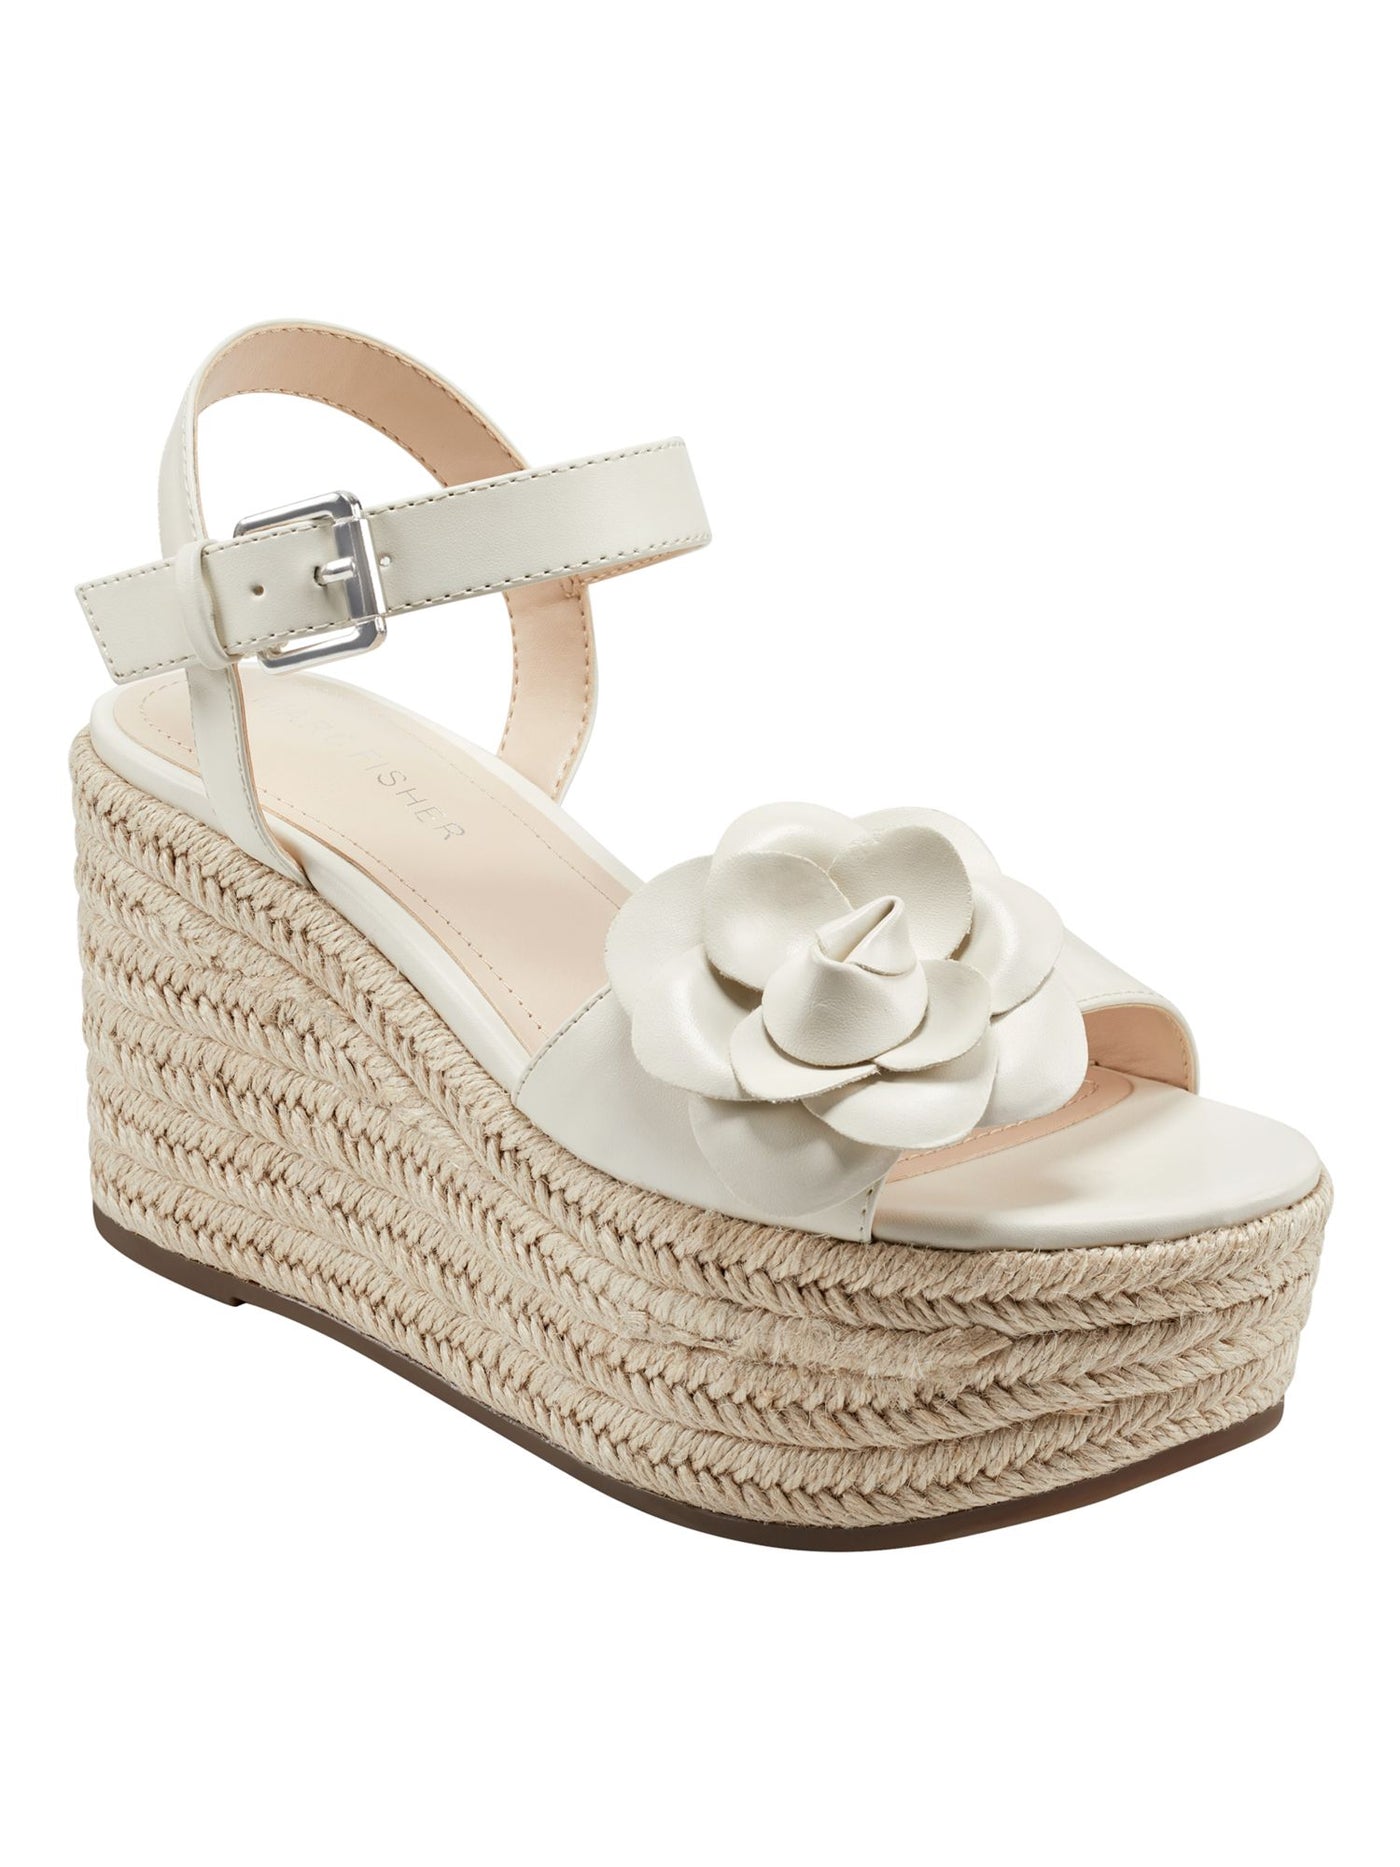 MARC FISHER Womens Ivory Padded Woven Flower Adjustable Strap Ankle Strap Venom Almond Toe Wedge Buckle Espadrille Shoes 6.5 M